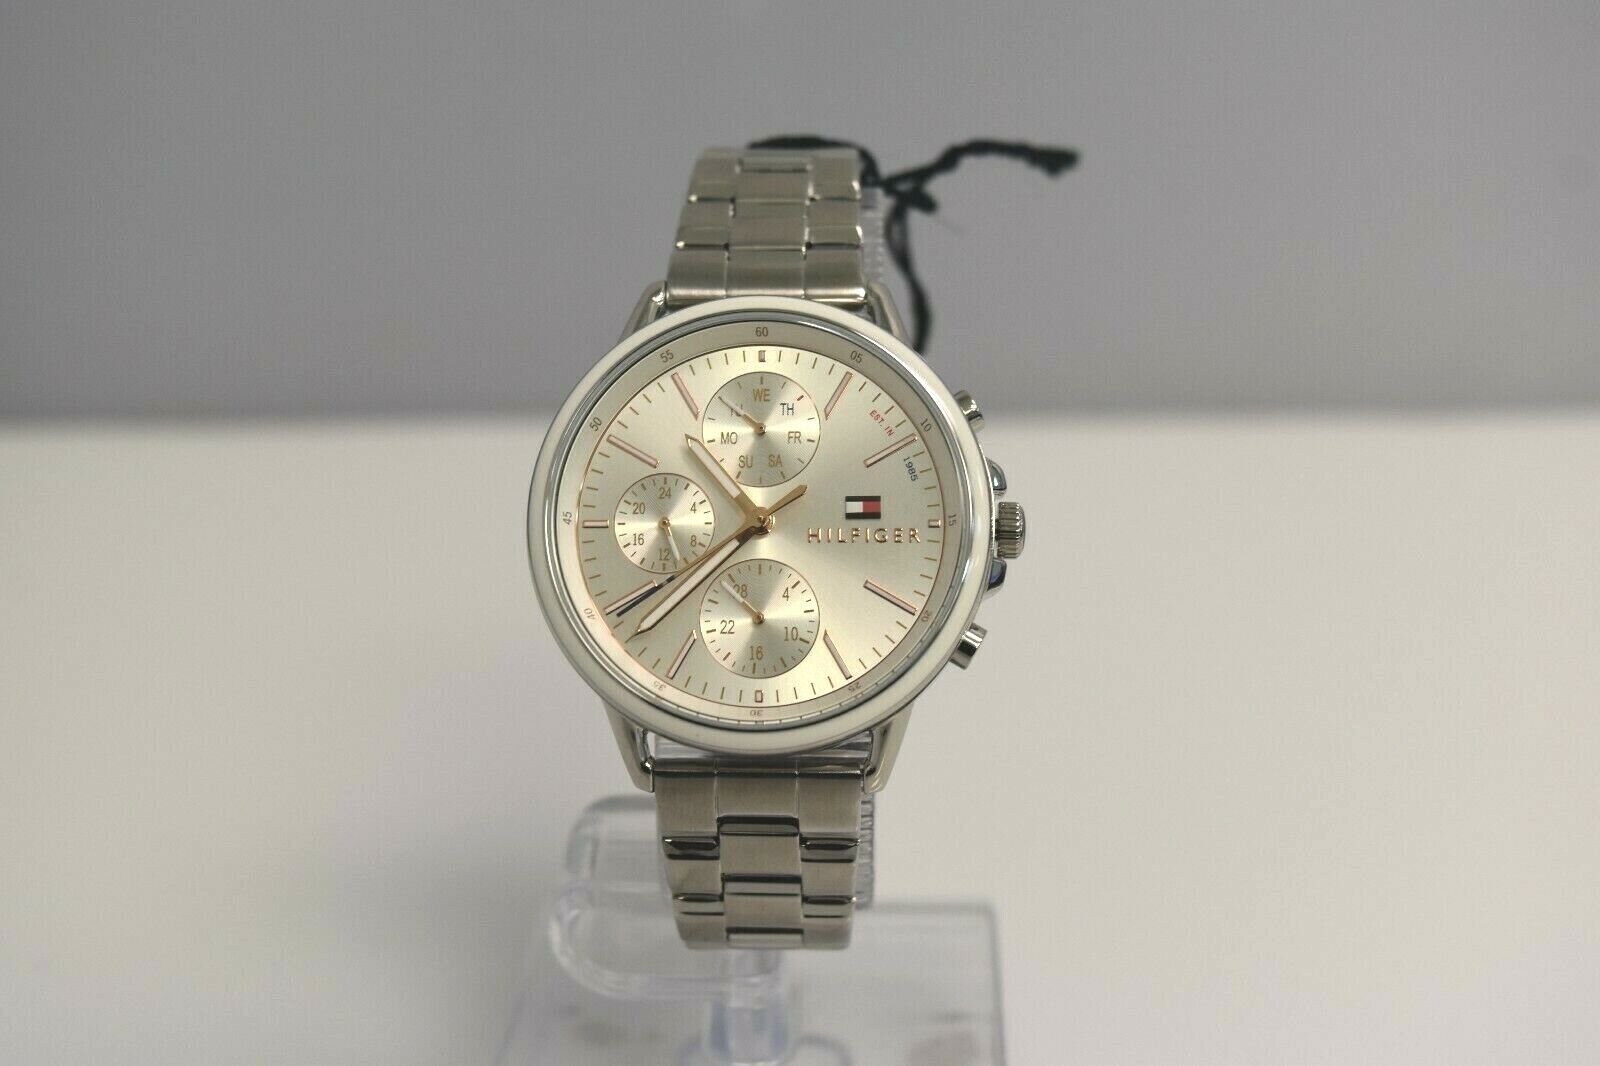 New Tommy Hilfiger Stainless Steel Silver Dial 1781787 $125 Watch